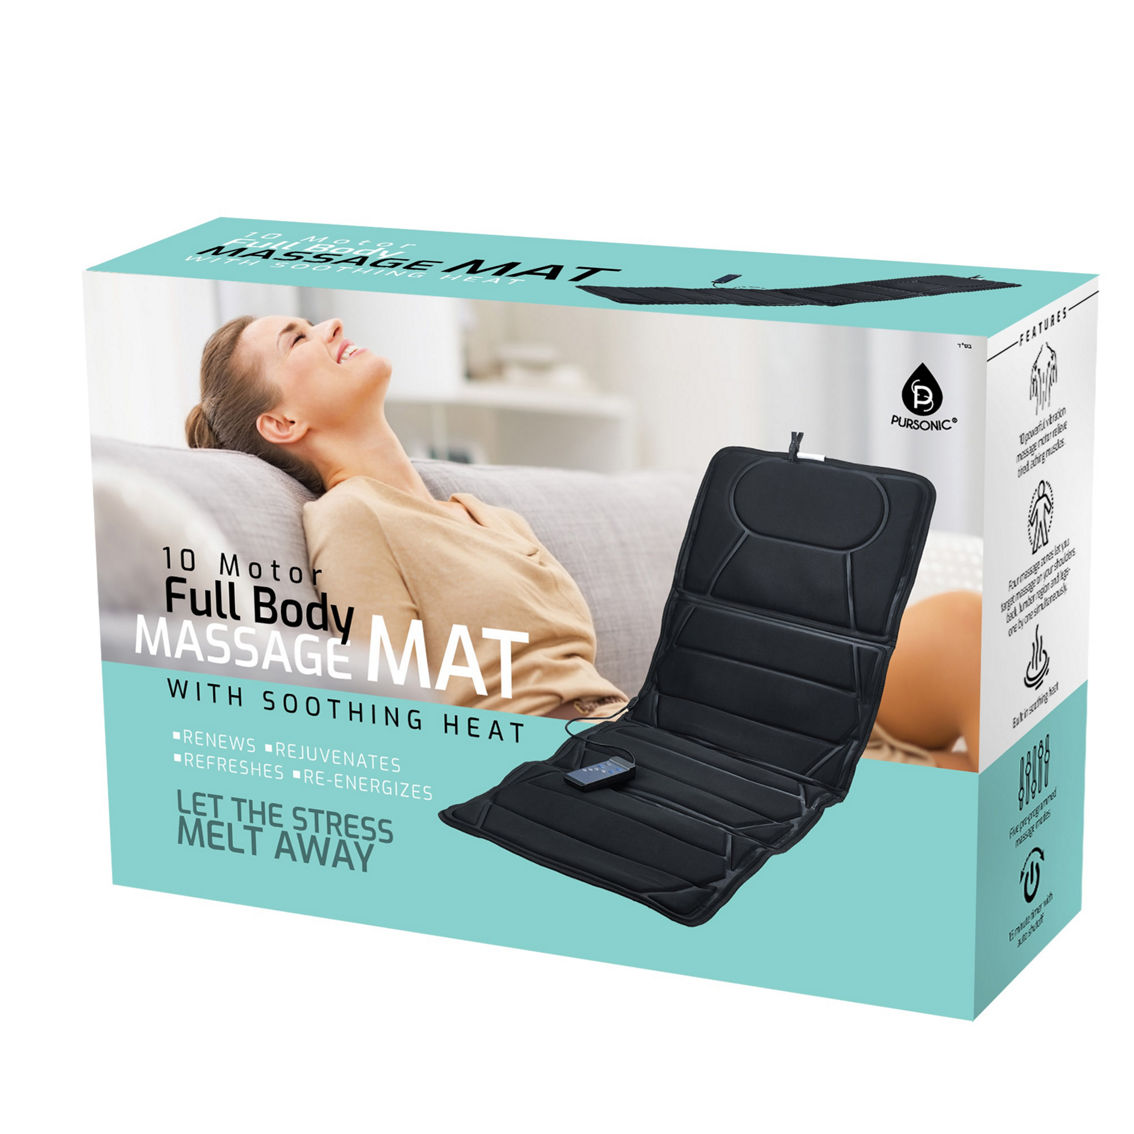 PURSONIC Luxury Massage Mat with Soothing Heat - 10 Powerful Motors - Image 2 of 5